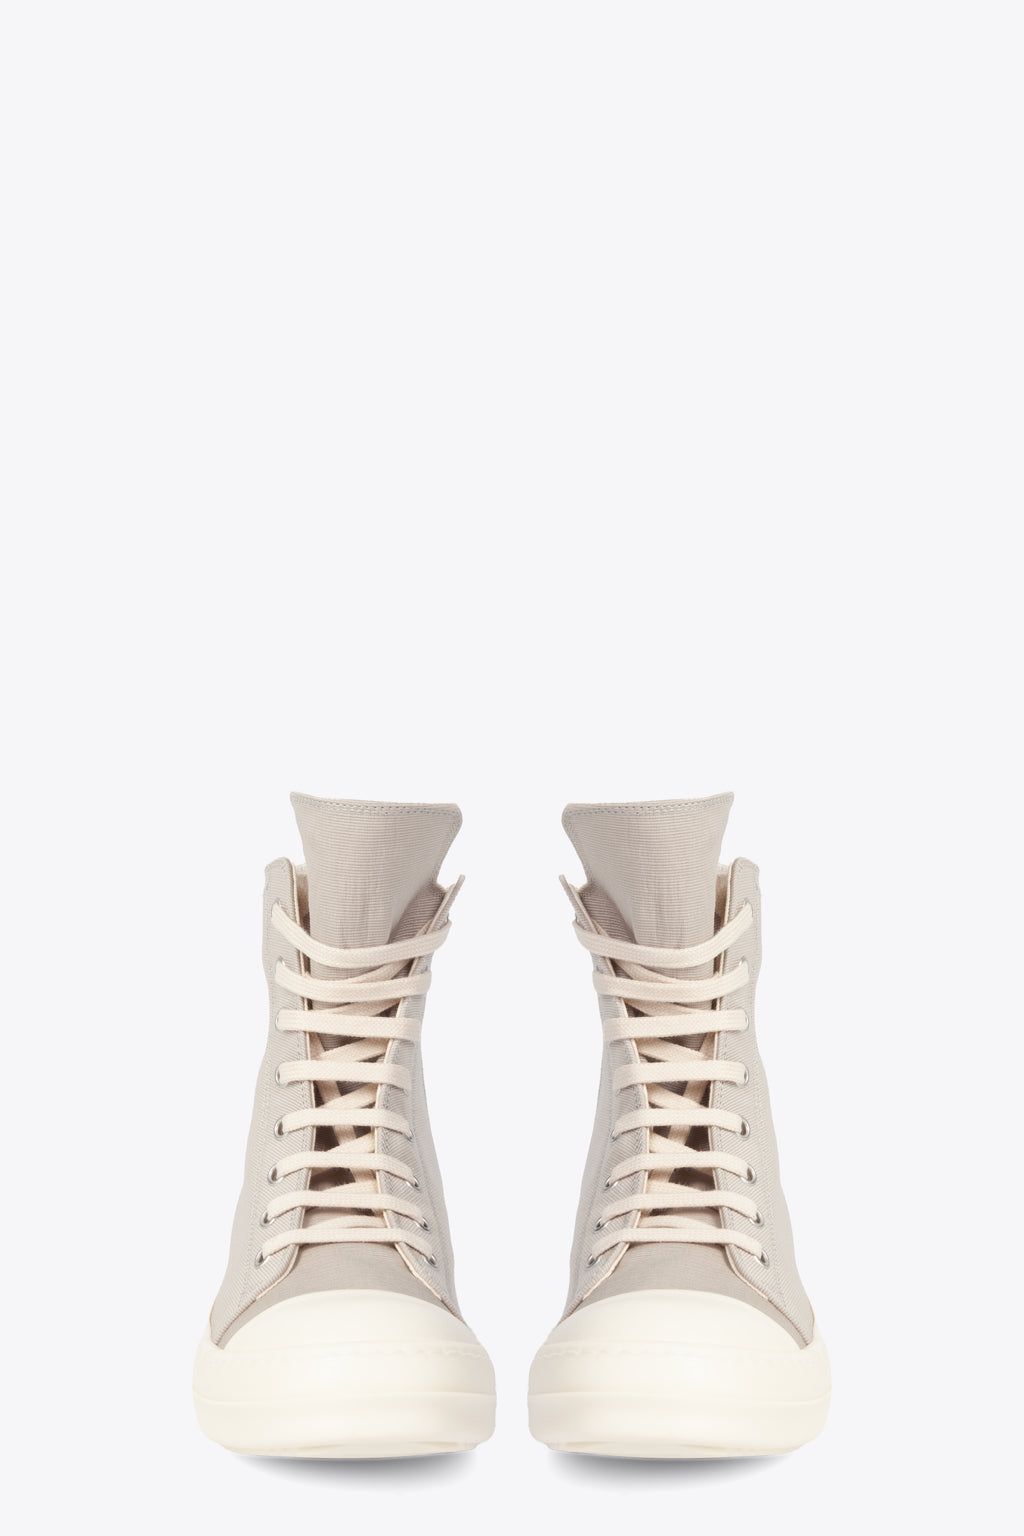 alt-image__Pearl-grey-cotton-lace-up-high-sneaker---Hi-sneaks